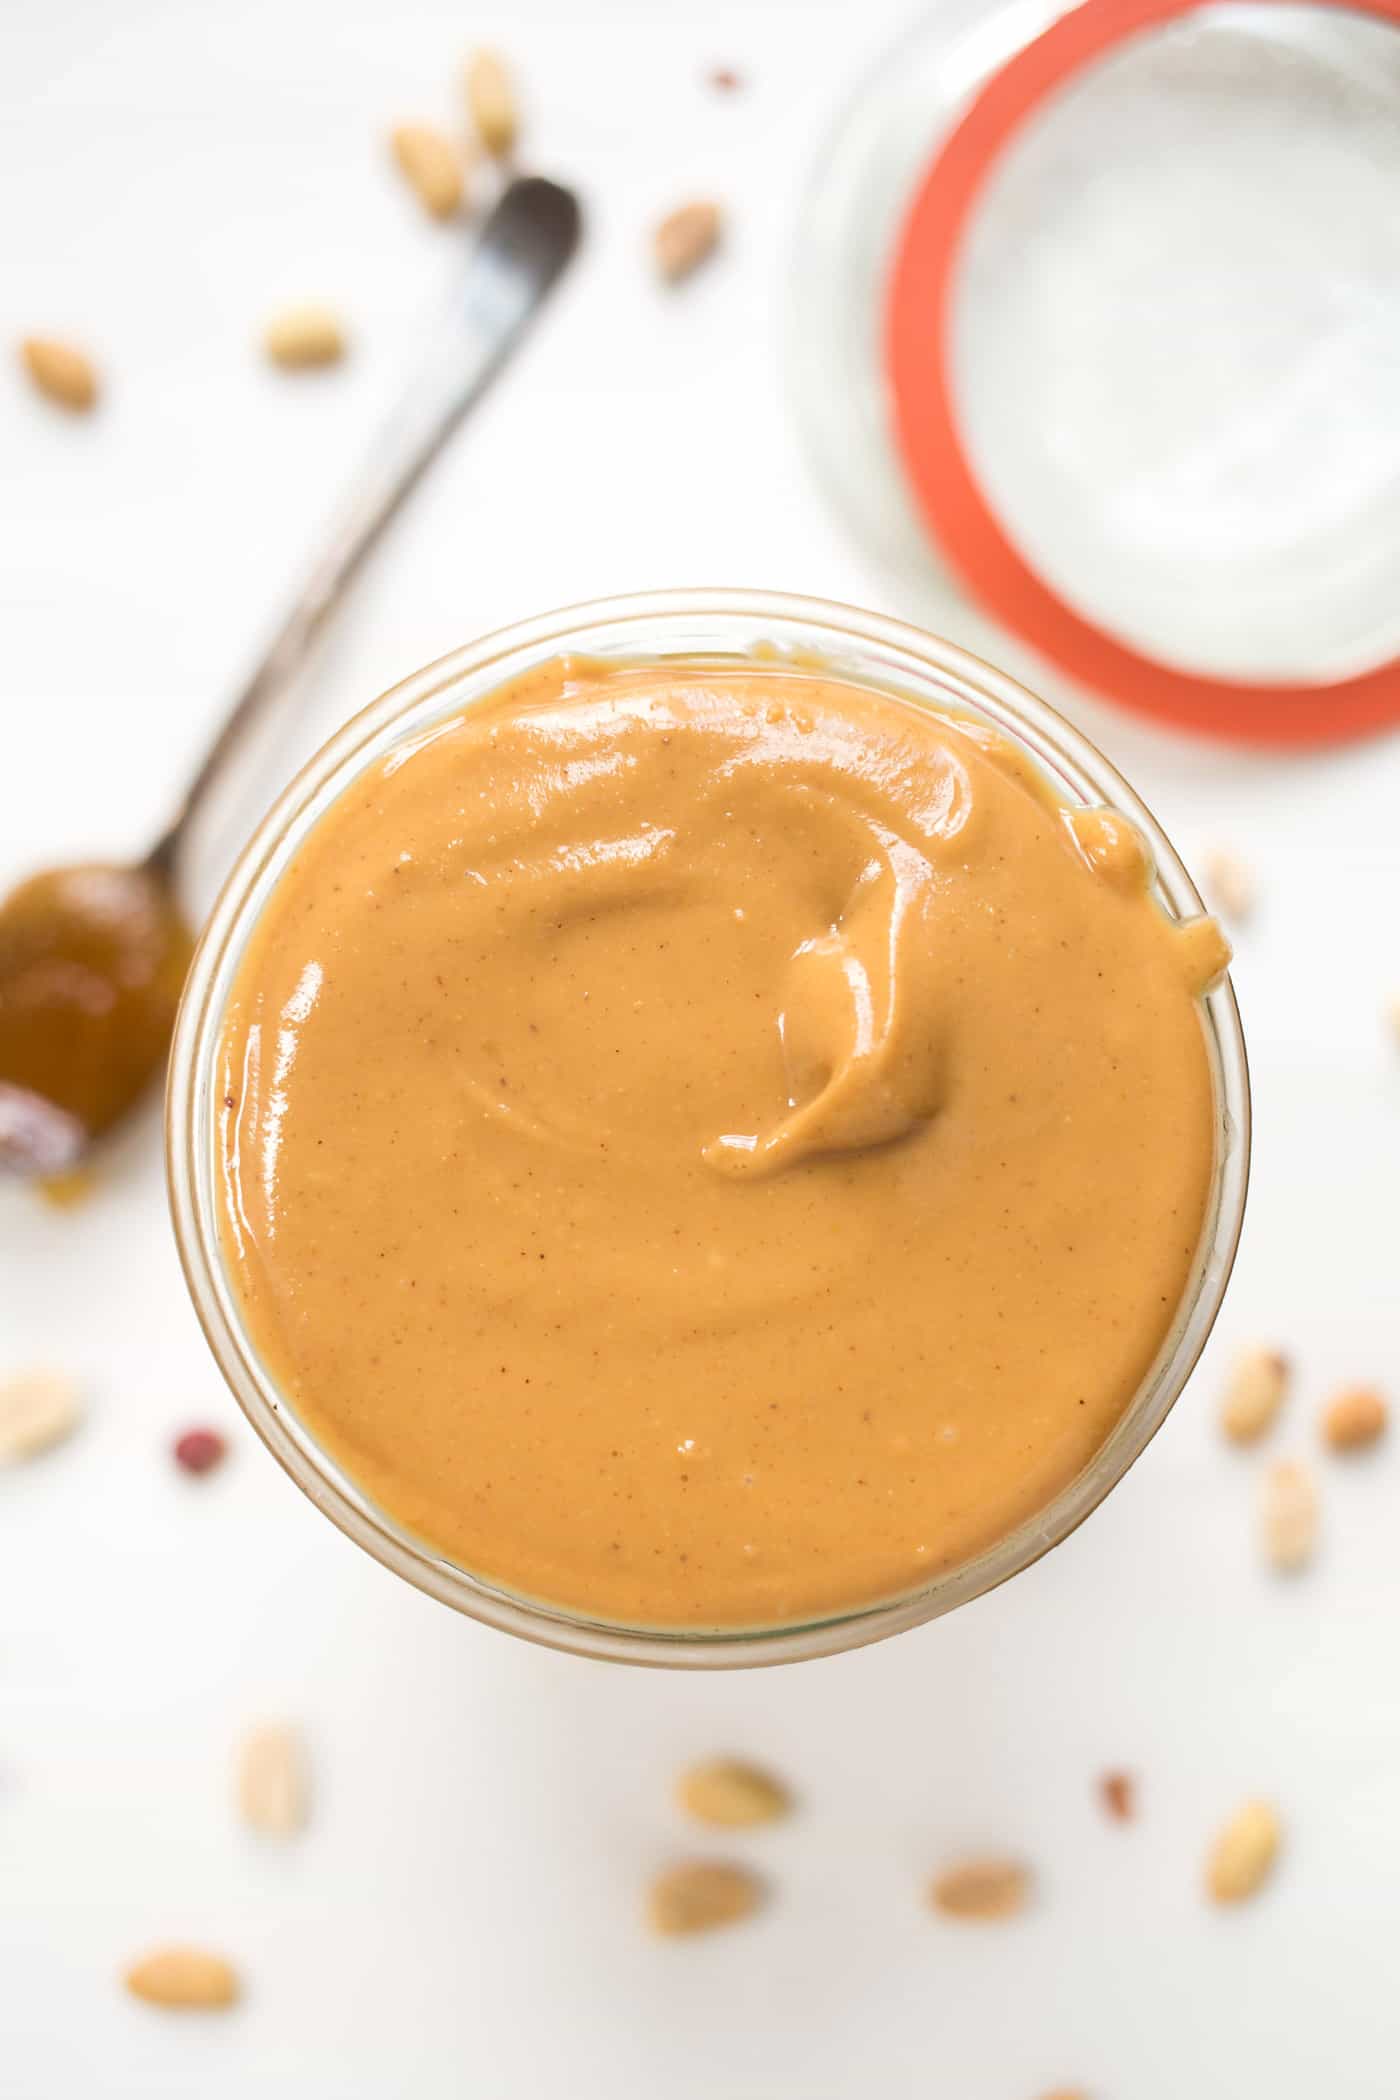 Overhead view of a jar of homemade peanut butter with the lid off